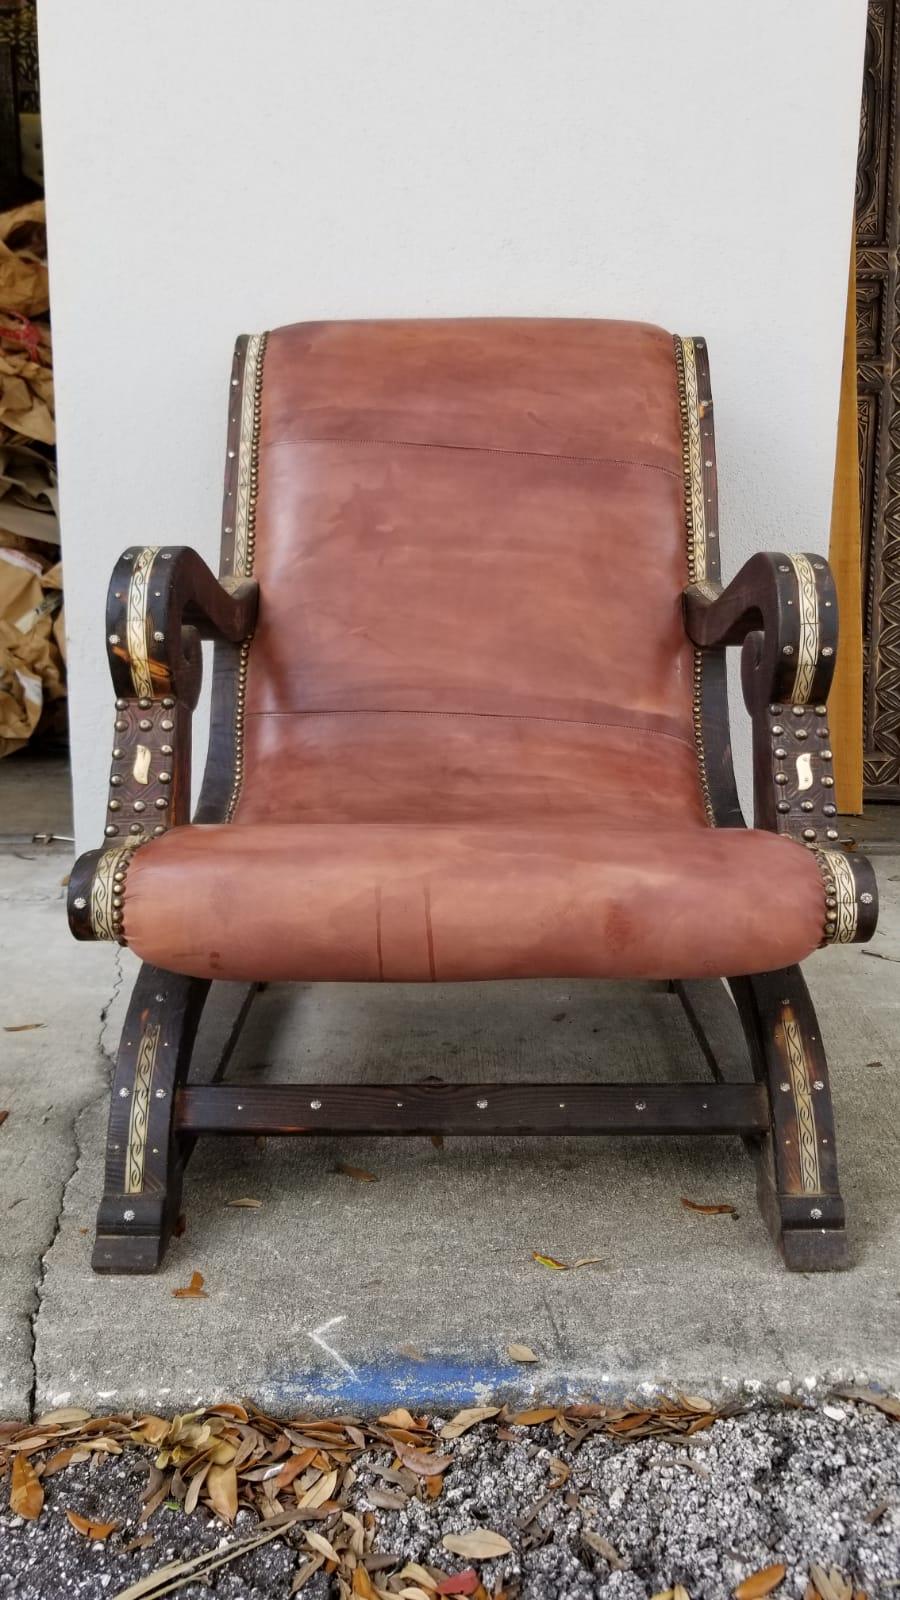 Beautiful leather inlaid cedar chair with camel bone from Morocco and very comfortable. Measures: 22 inside wide.
It’s hand tanned leather. It’s a moorish Andalusian chair vintage with several pieces recovered from an old British diplomats riad.